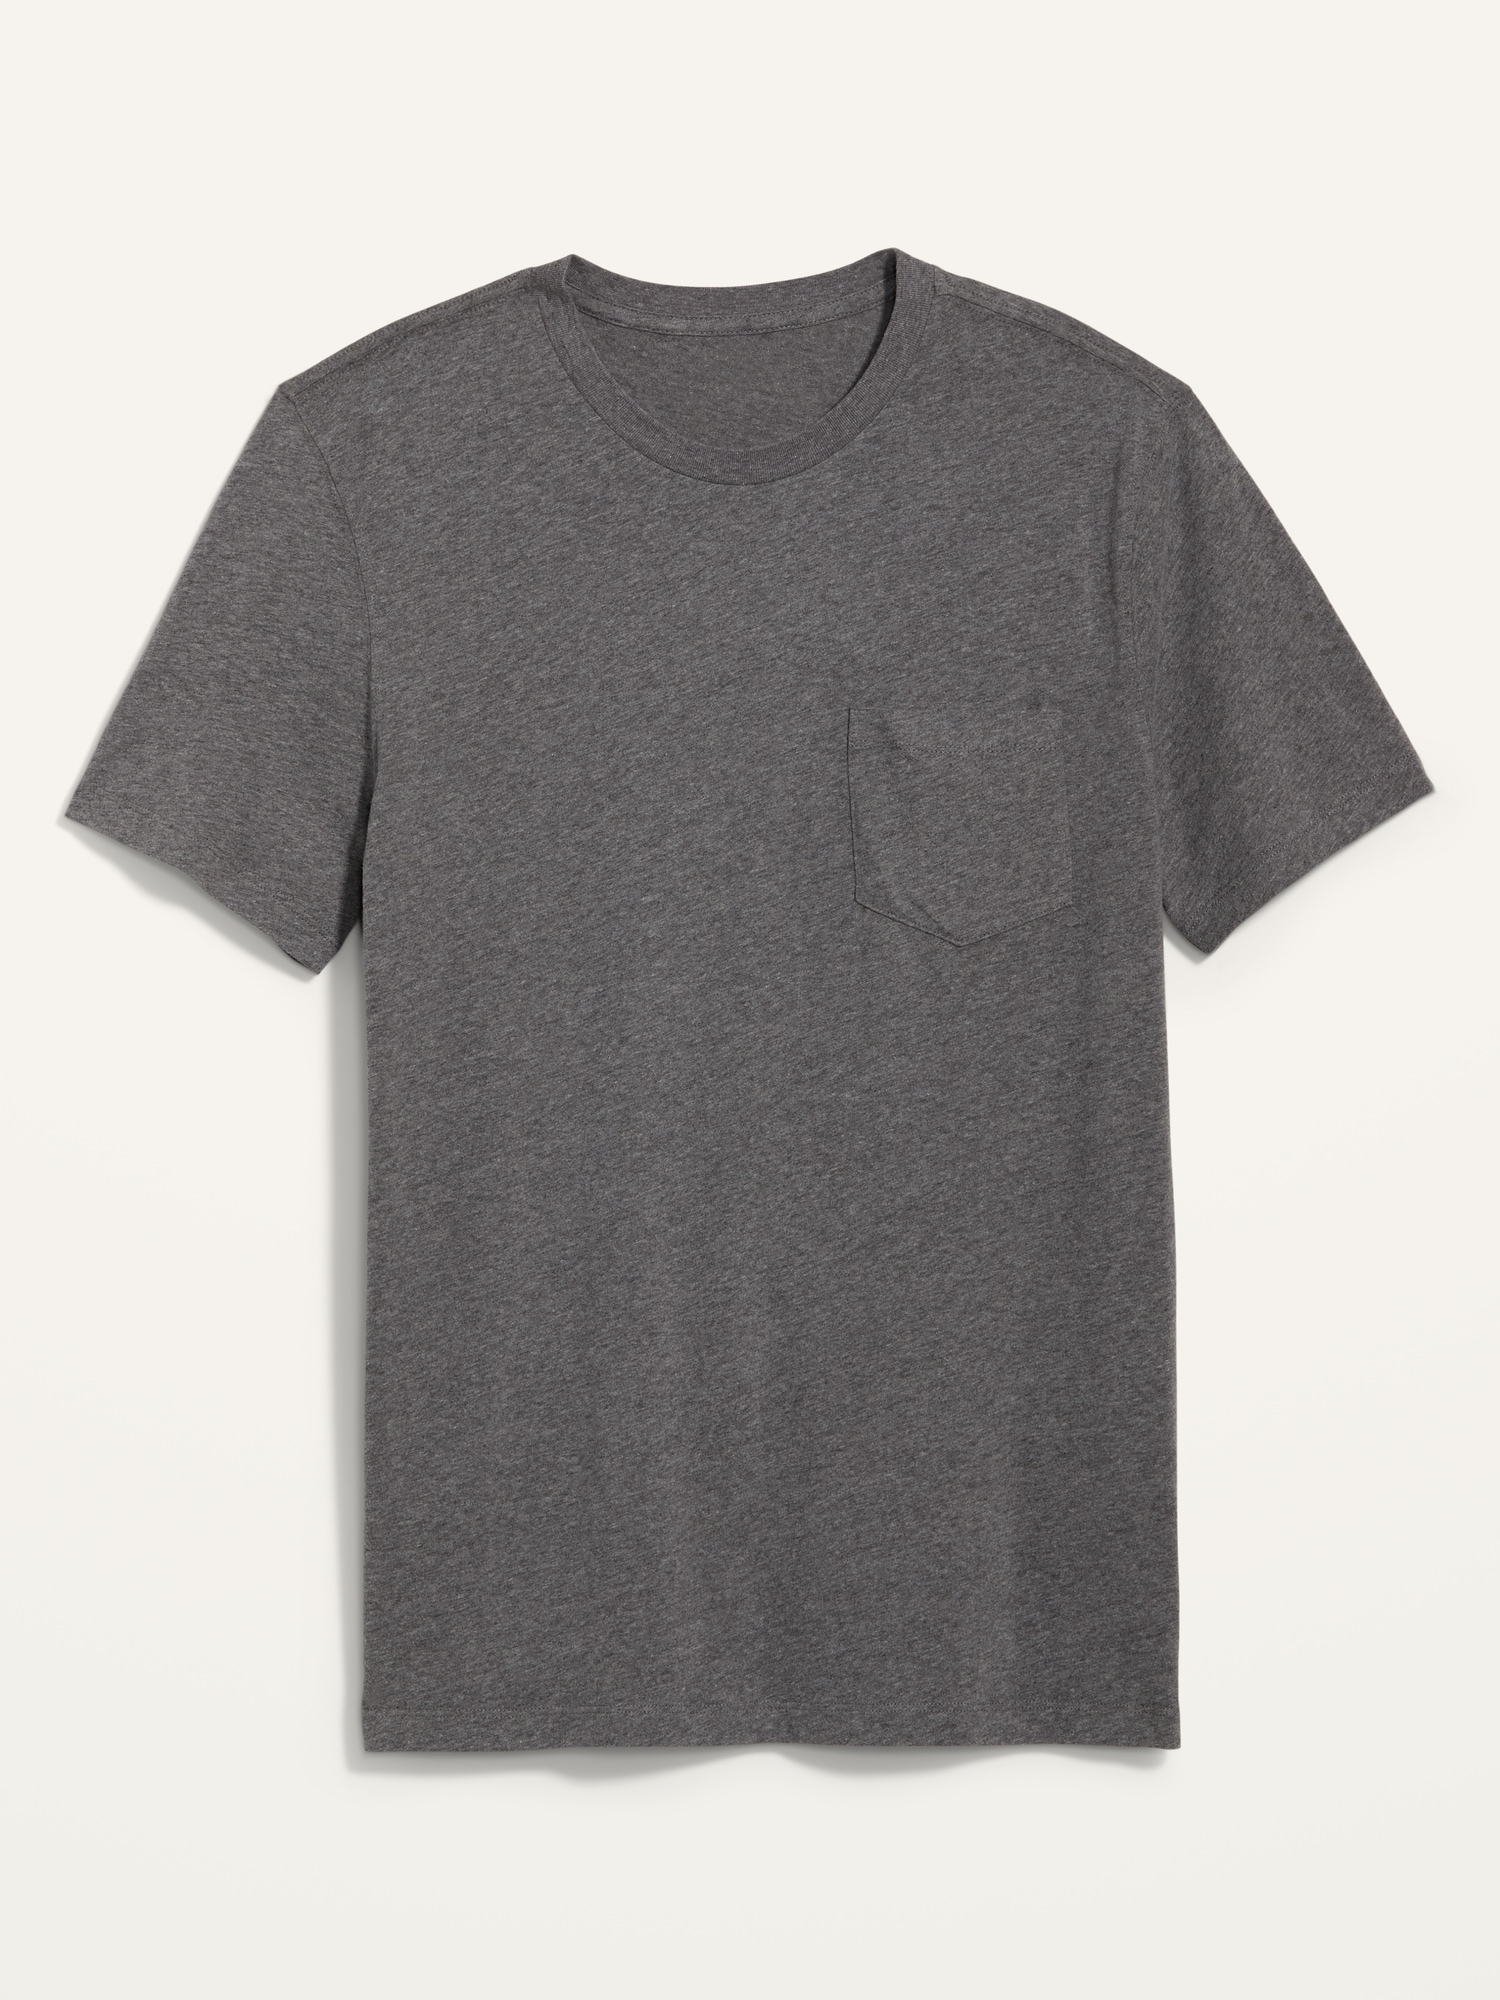 Old Navy Soft-Washed Chest-Pocket Crew-Neck T-Shirt for Men gray. 1